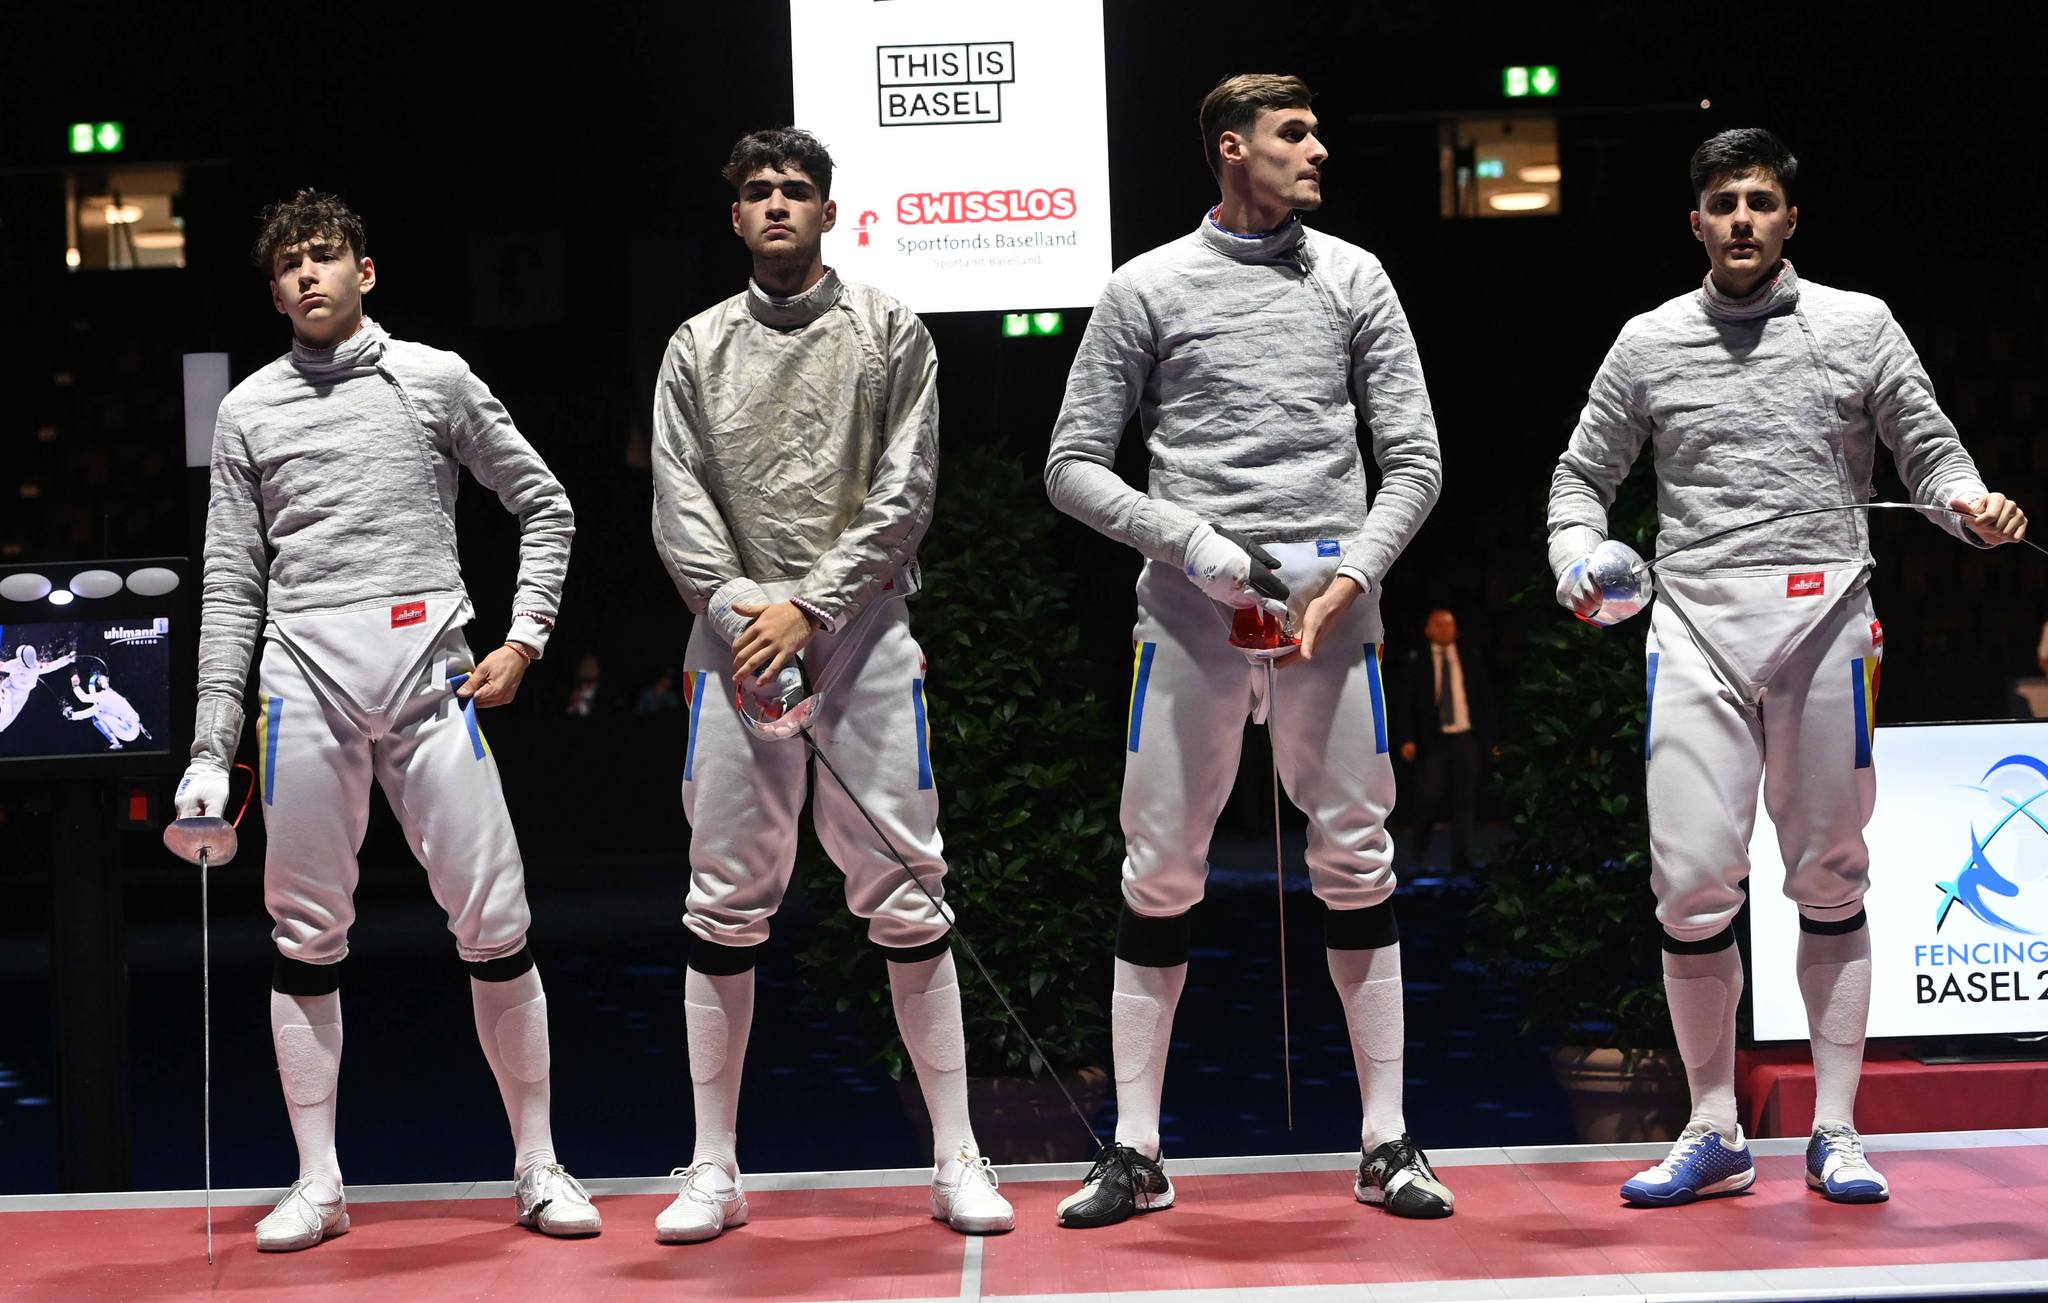 Romania’s men’s sabre team secures silver medal at European Fencing Championships in Basel